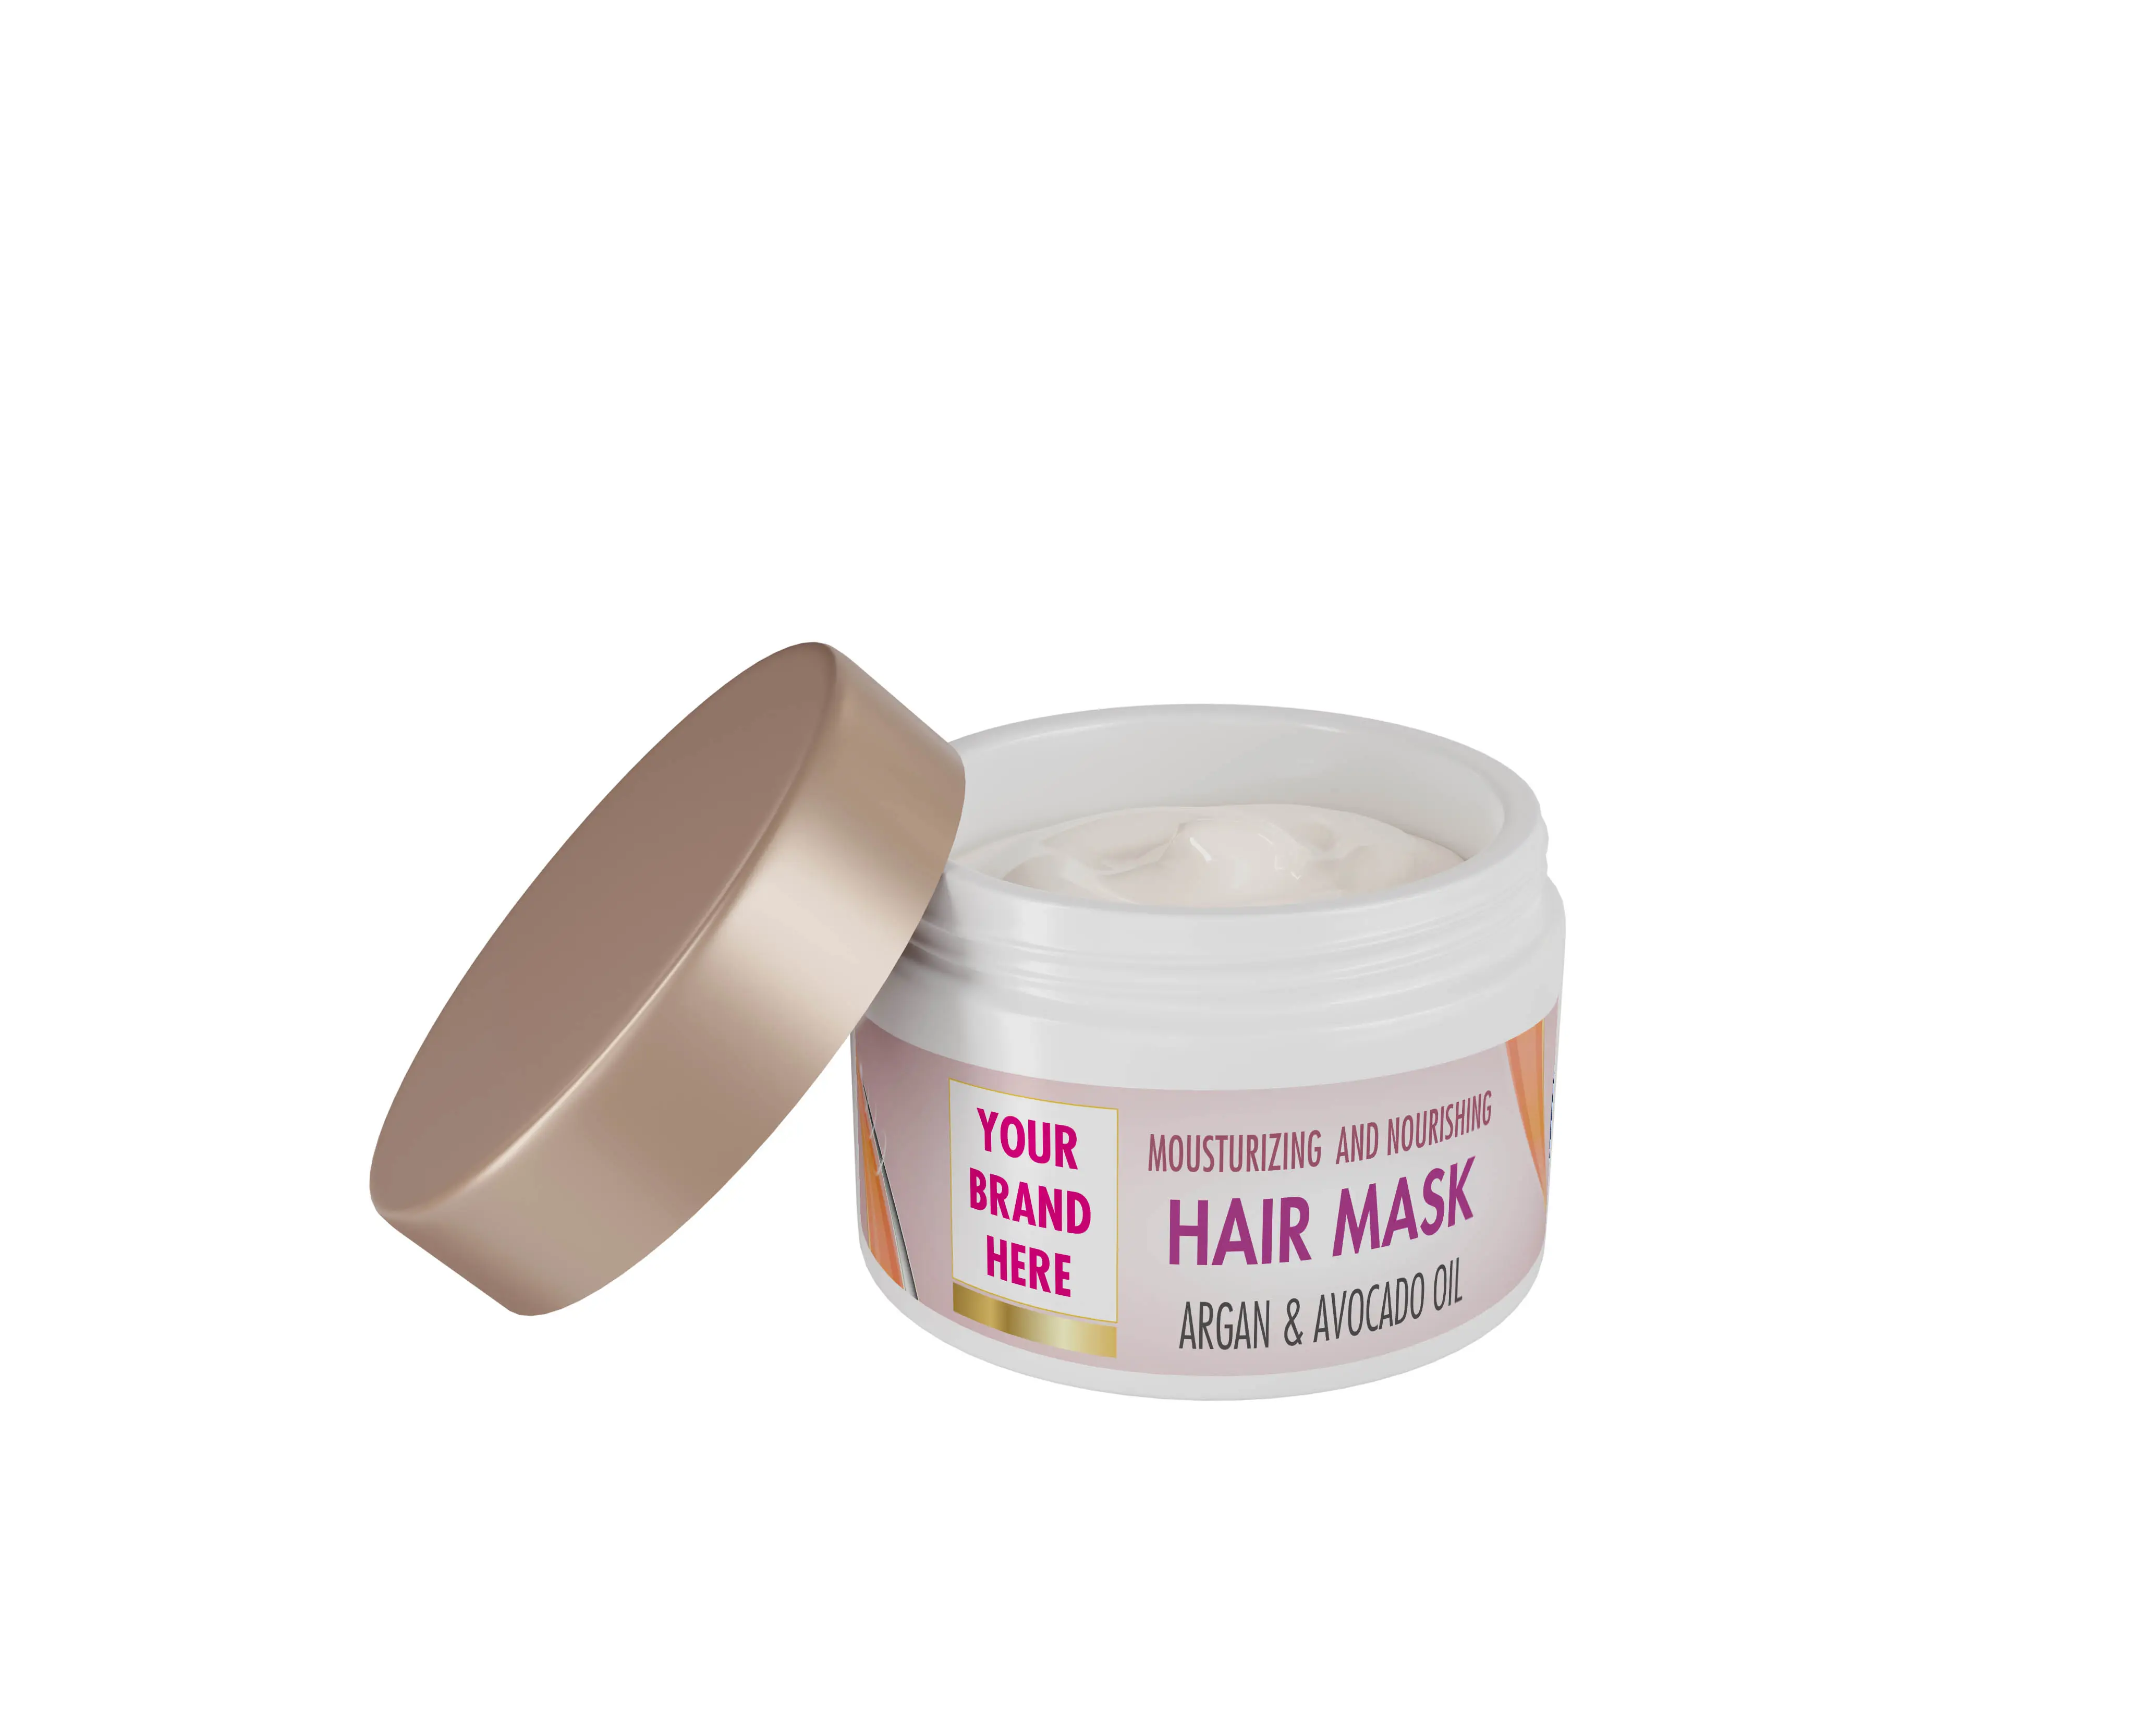 Moisturizing and nourishing hair mask Argan & Avocado Oil soften and restructure hair strands Moisturizing and Nourishing